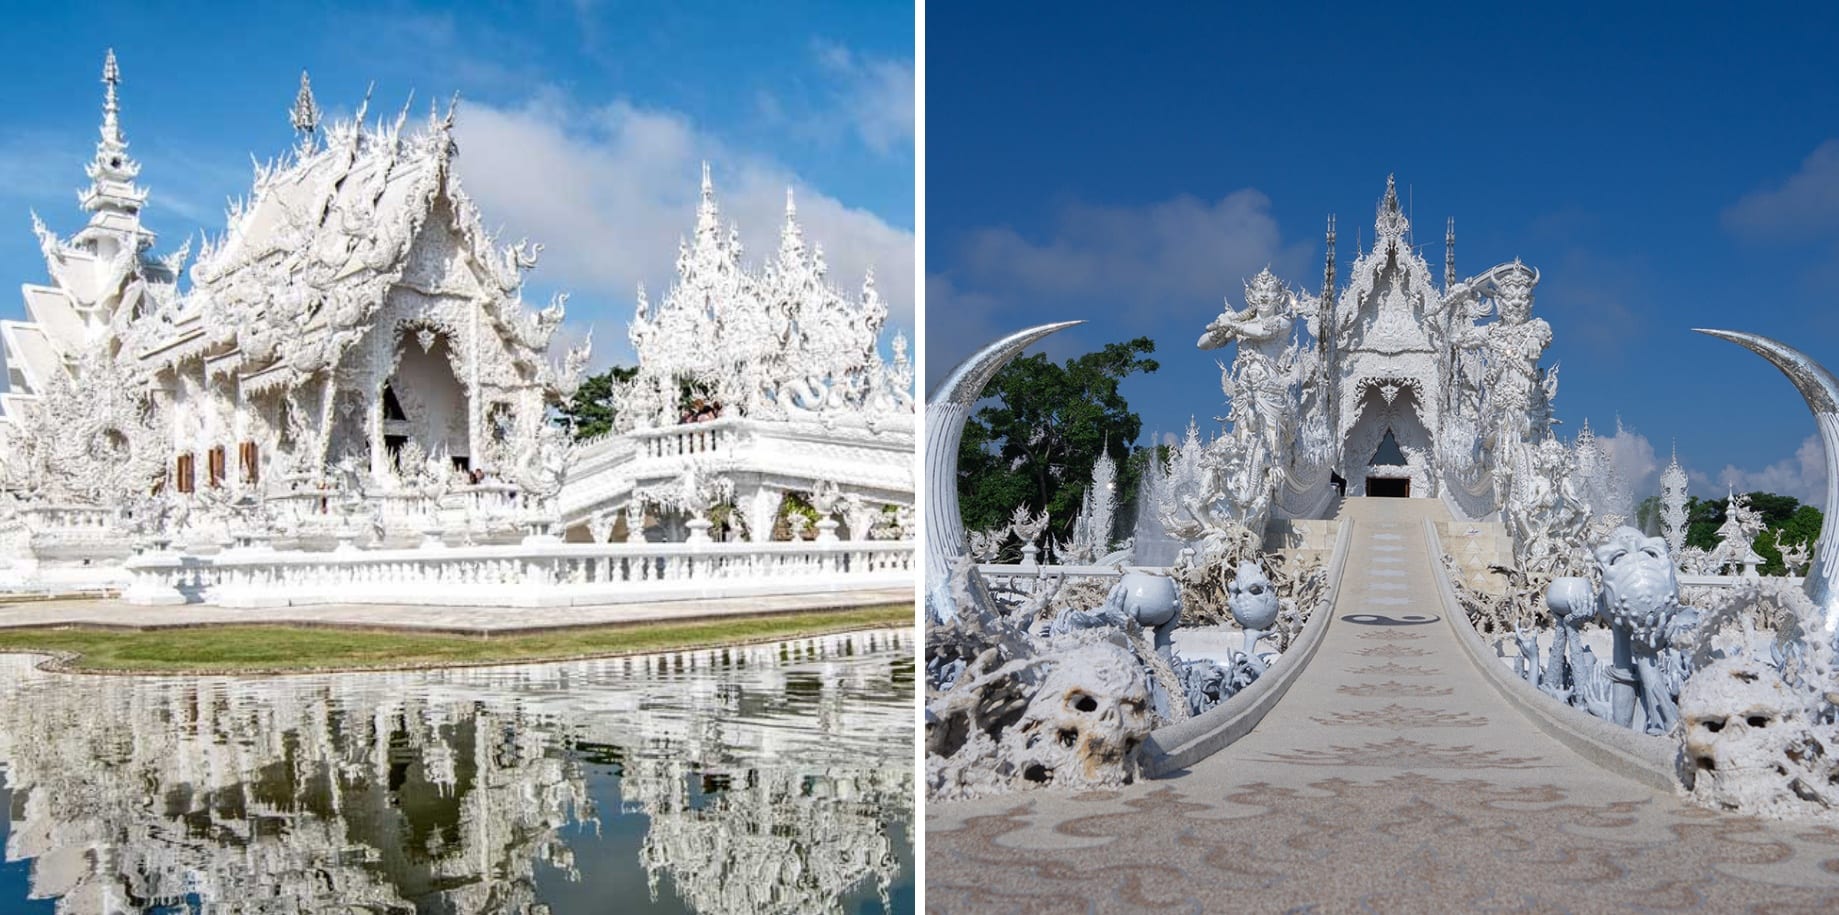 Side-on and frontal view of the Wat Rong Khun Temple in Thailand